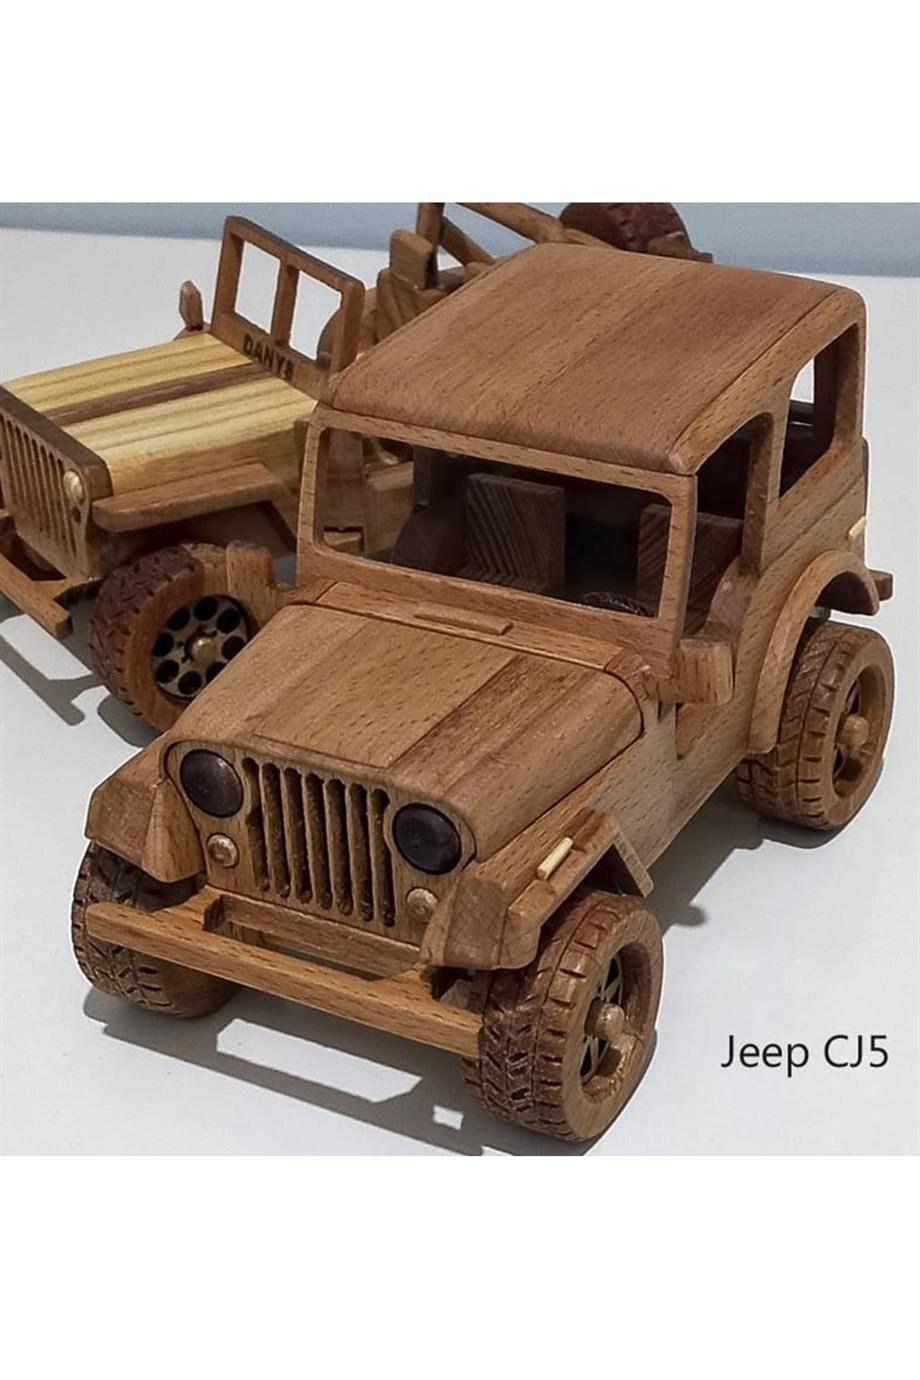 Taygoo Wooden Toy Model Car Series Jeep